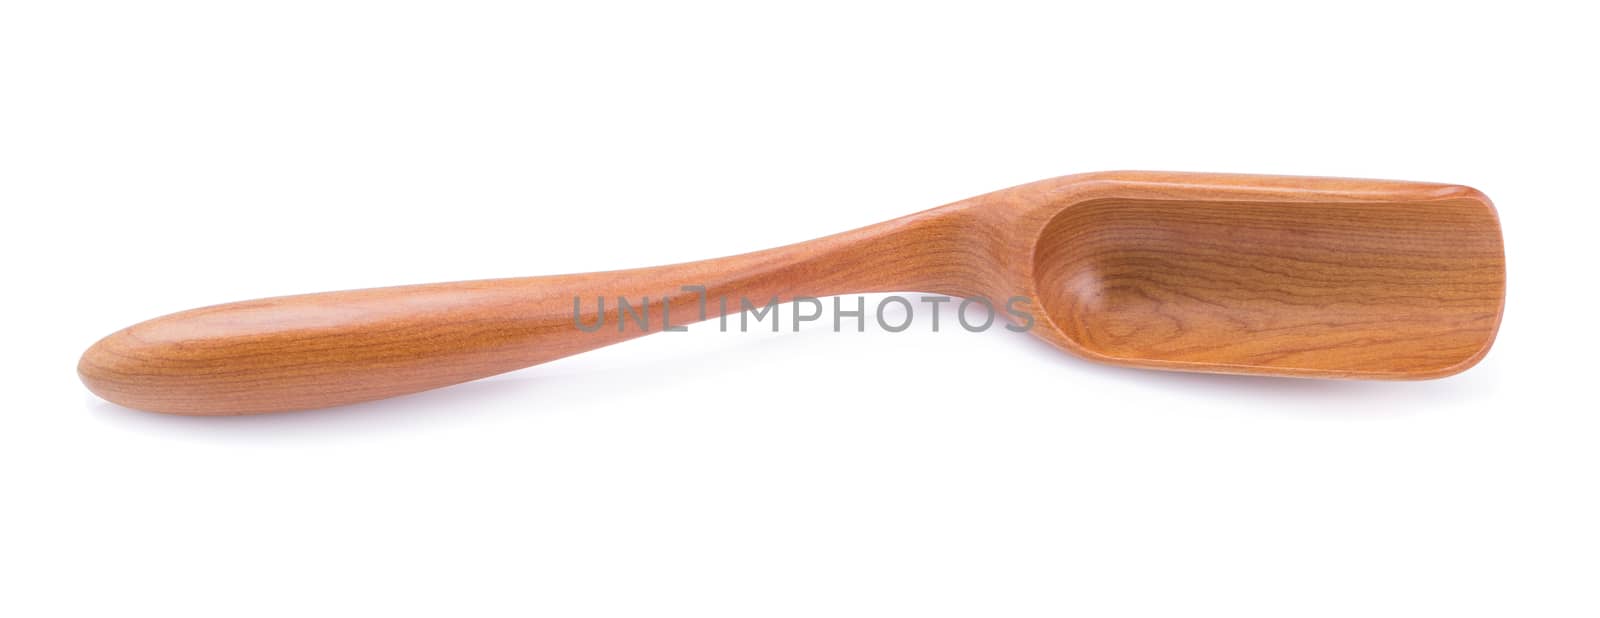 Wooden spoon on a white background.